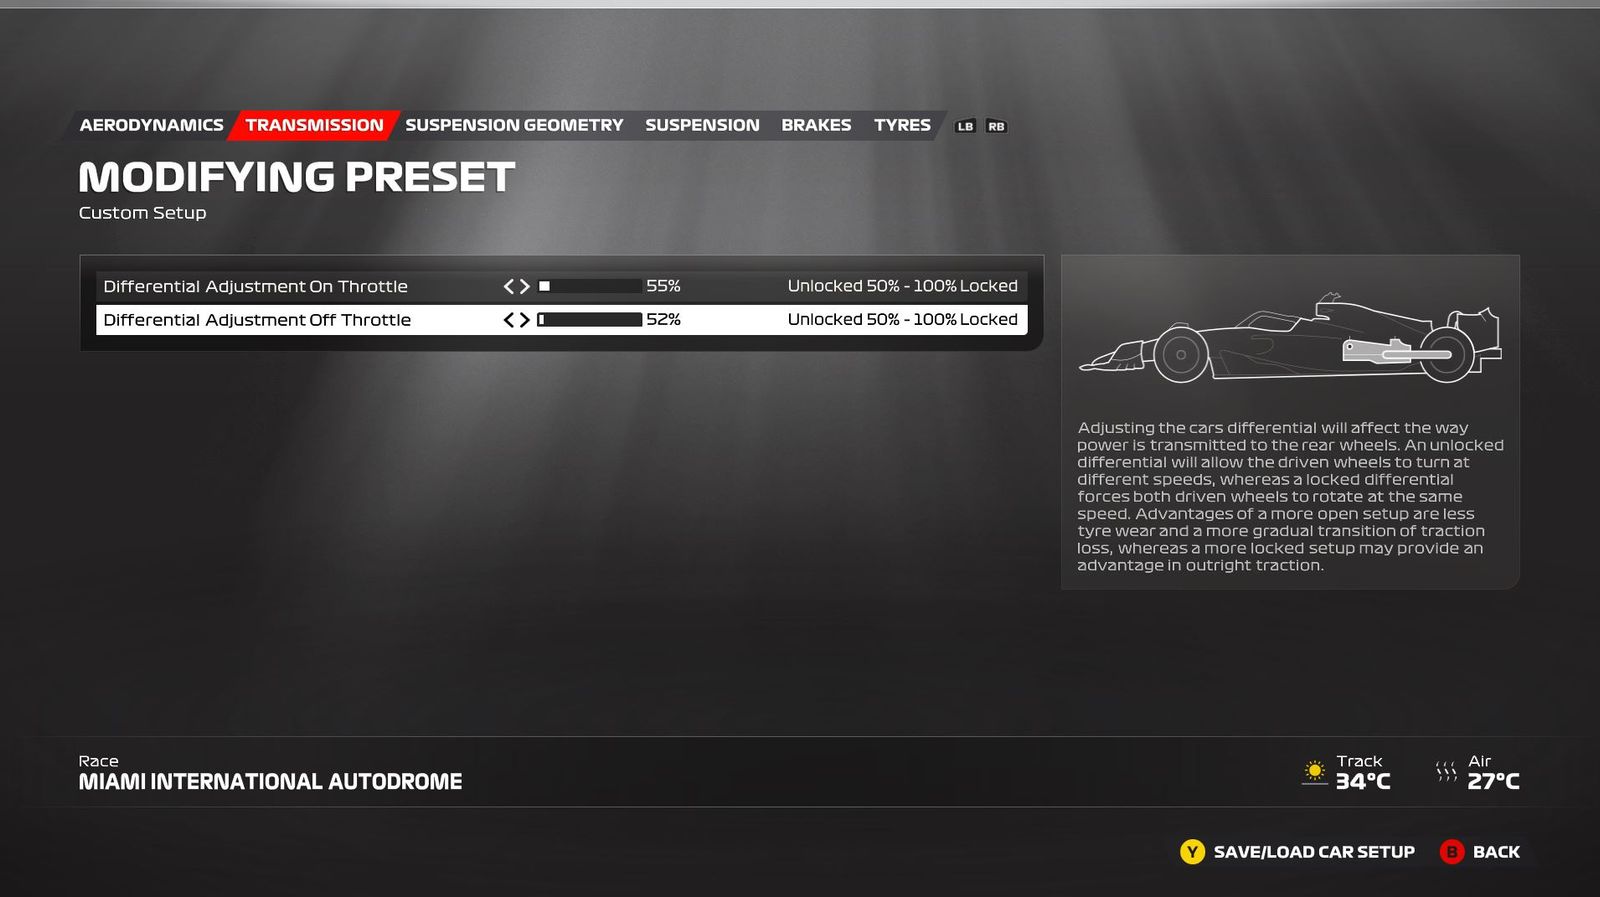 F1 23 Miami setup transmission screen showing the ideal settings